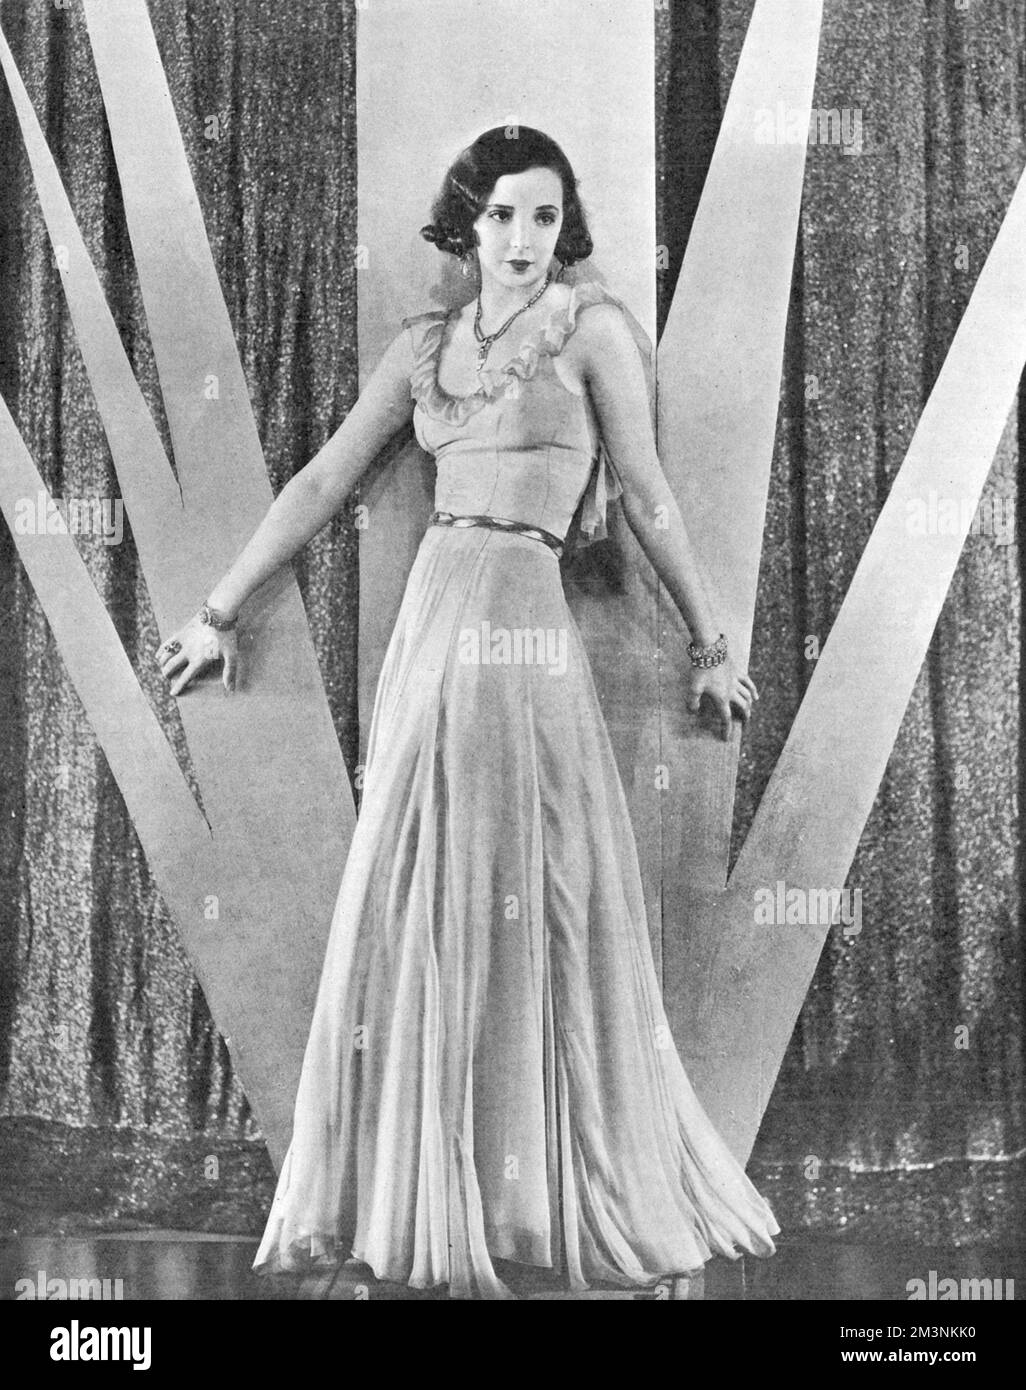 Jessie Matthews (1907 - 1981), British singer, dancer and actress pictured at the time she appeared in her first film, Out of the Blue, filmed at Elstree studios.     Date: 1931 Stock Photo